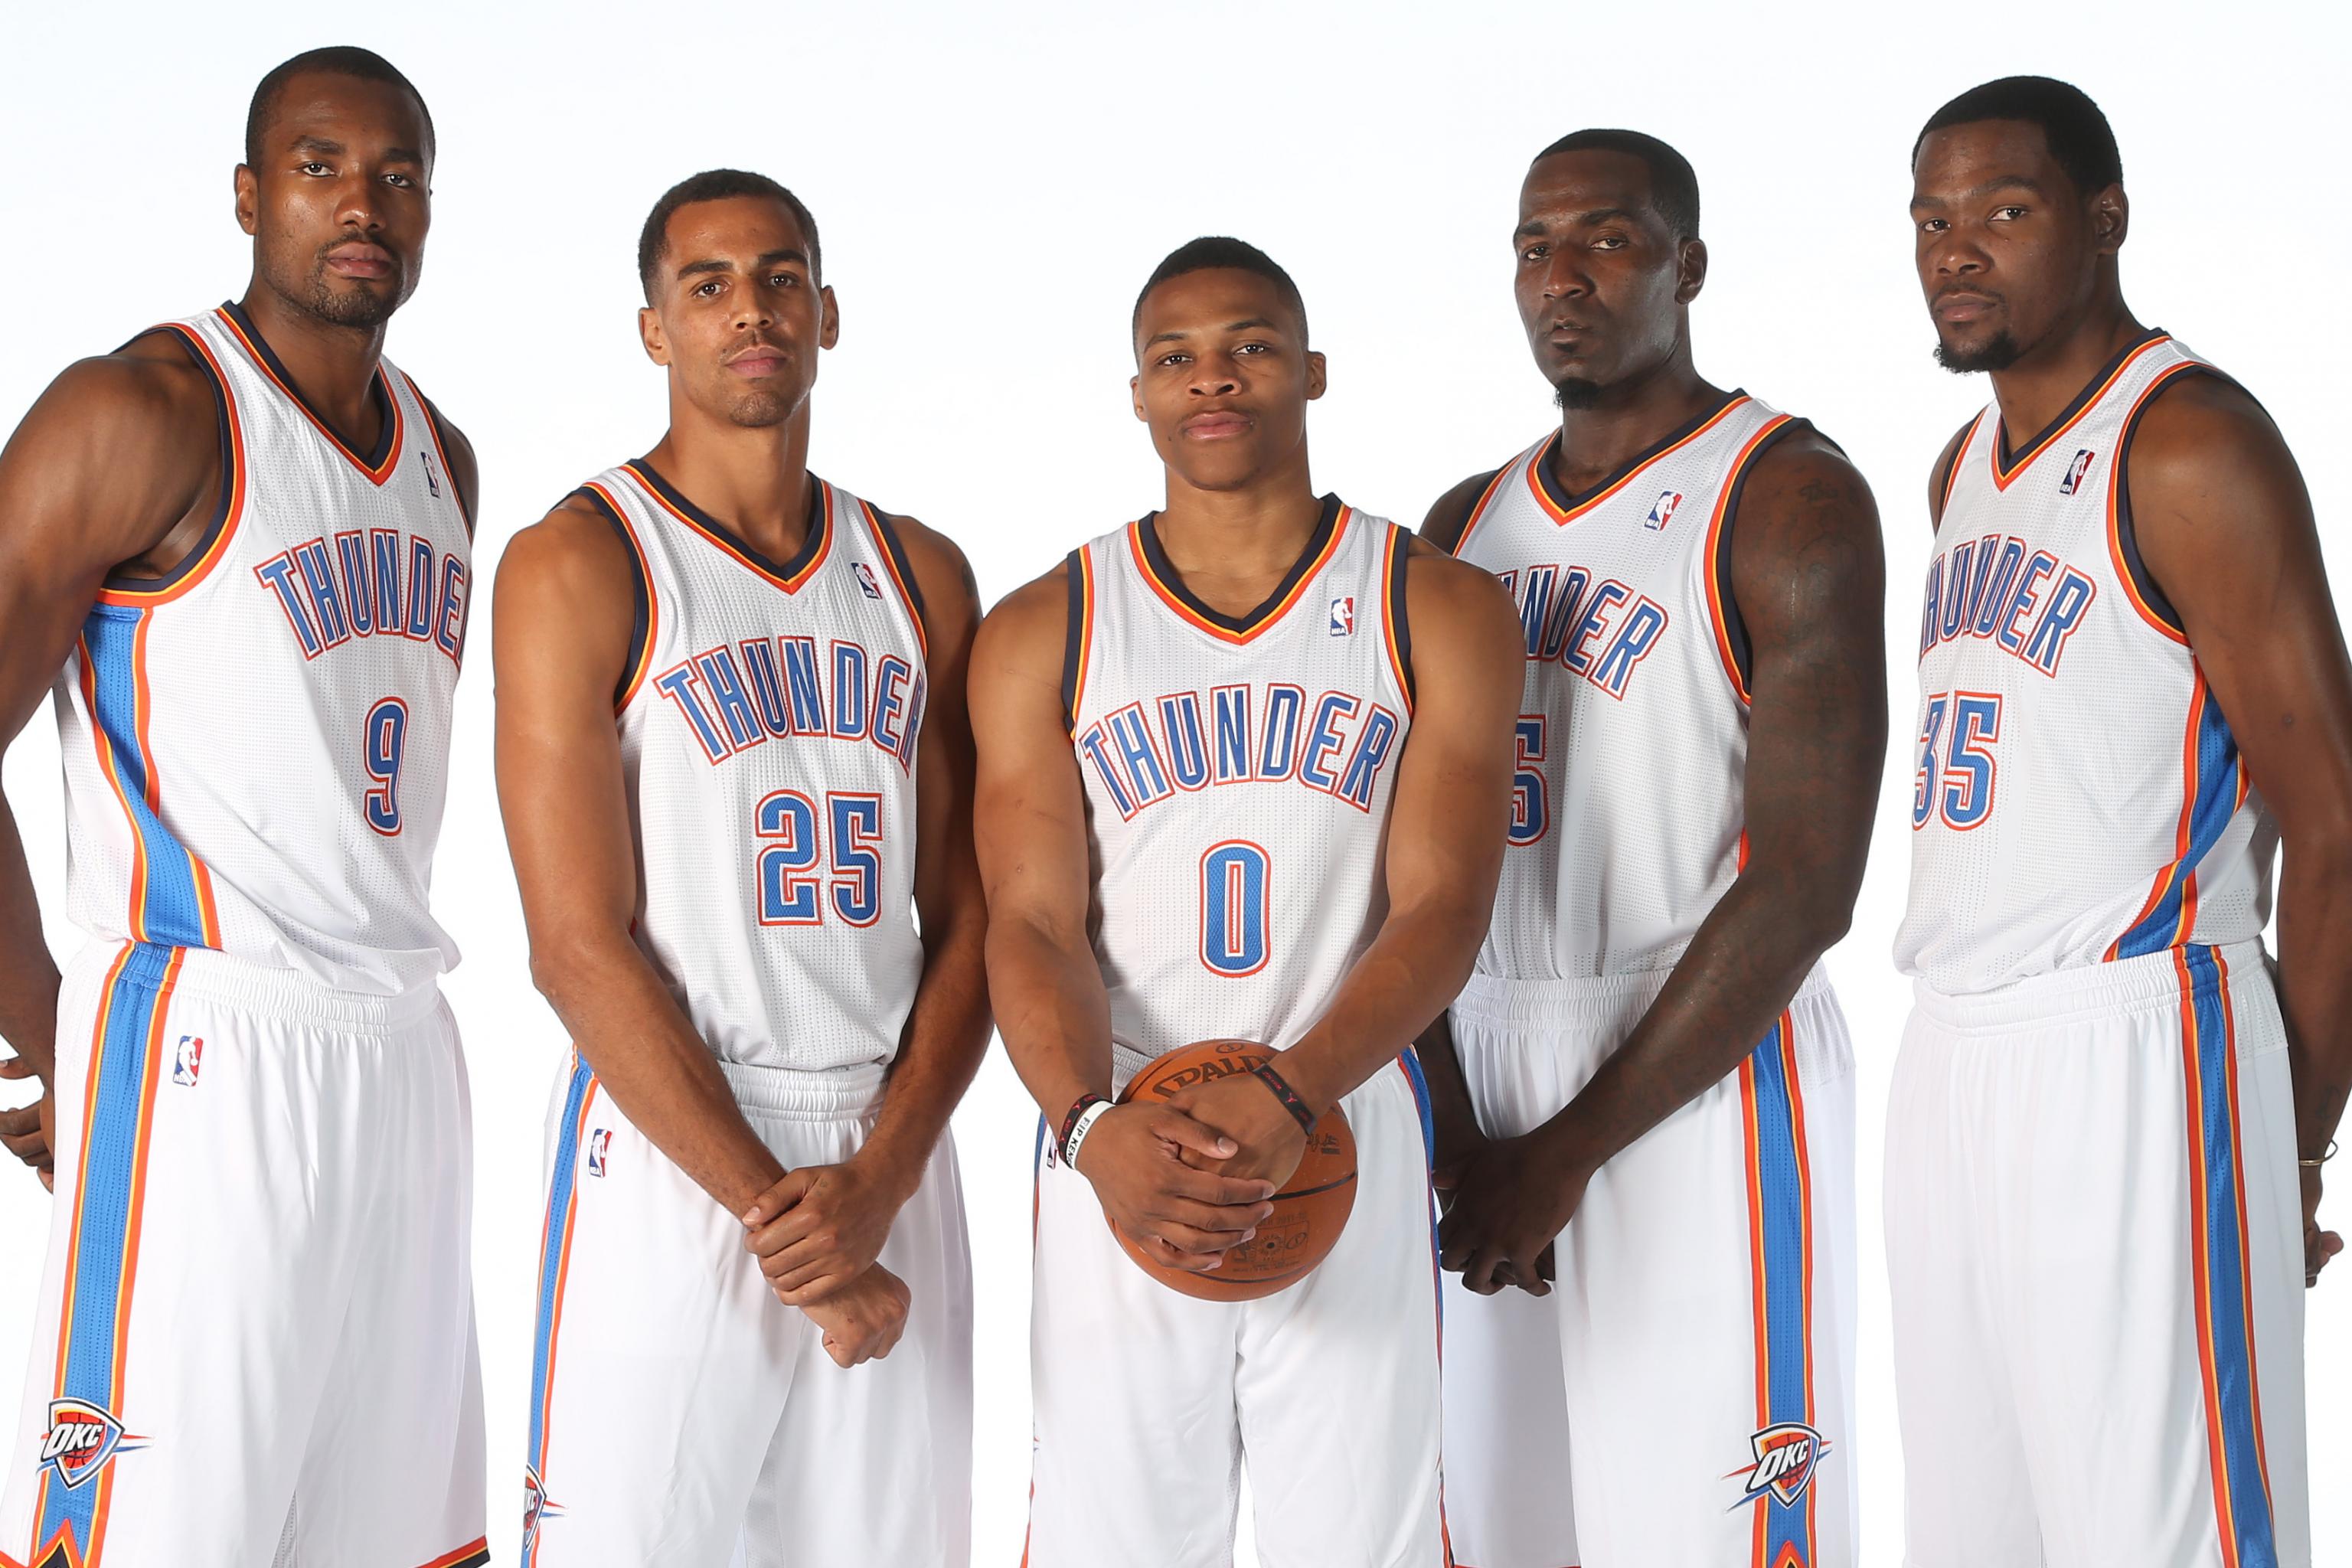 OKC Thunder: 11 stats to know through first 11 games